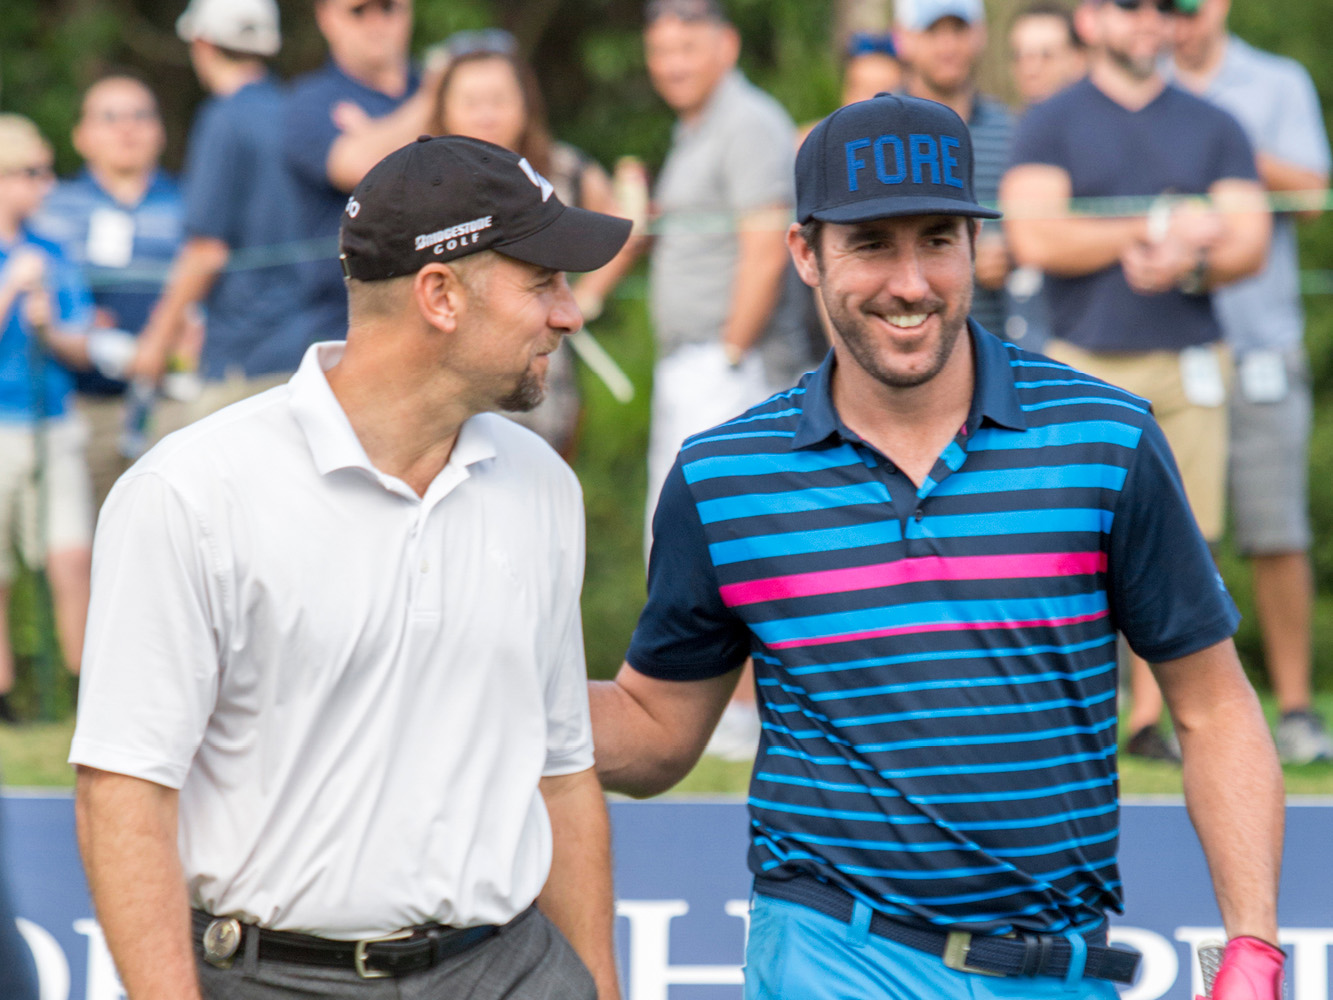 MLB Hall of Famer John Smoltz and Cy Young Award winner Justin Verlander are expected to compete in the LPGA Tour's 2019 tournament.